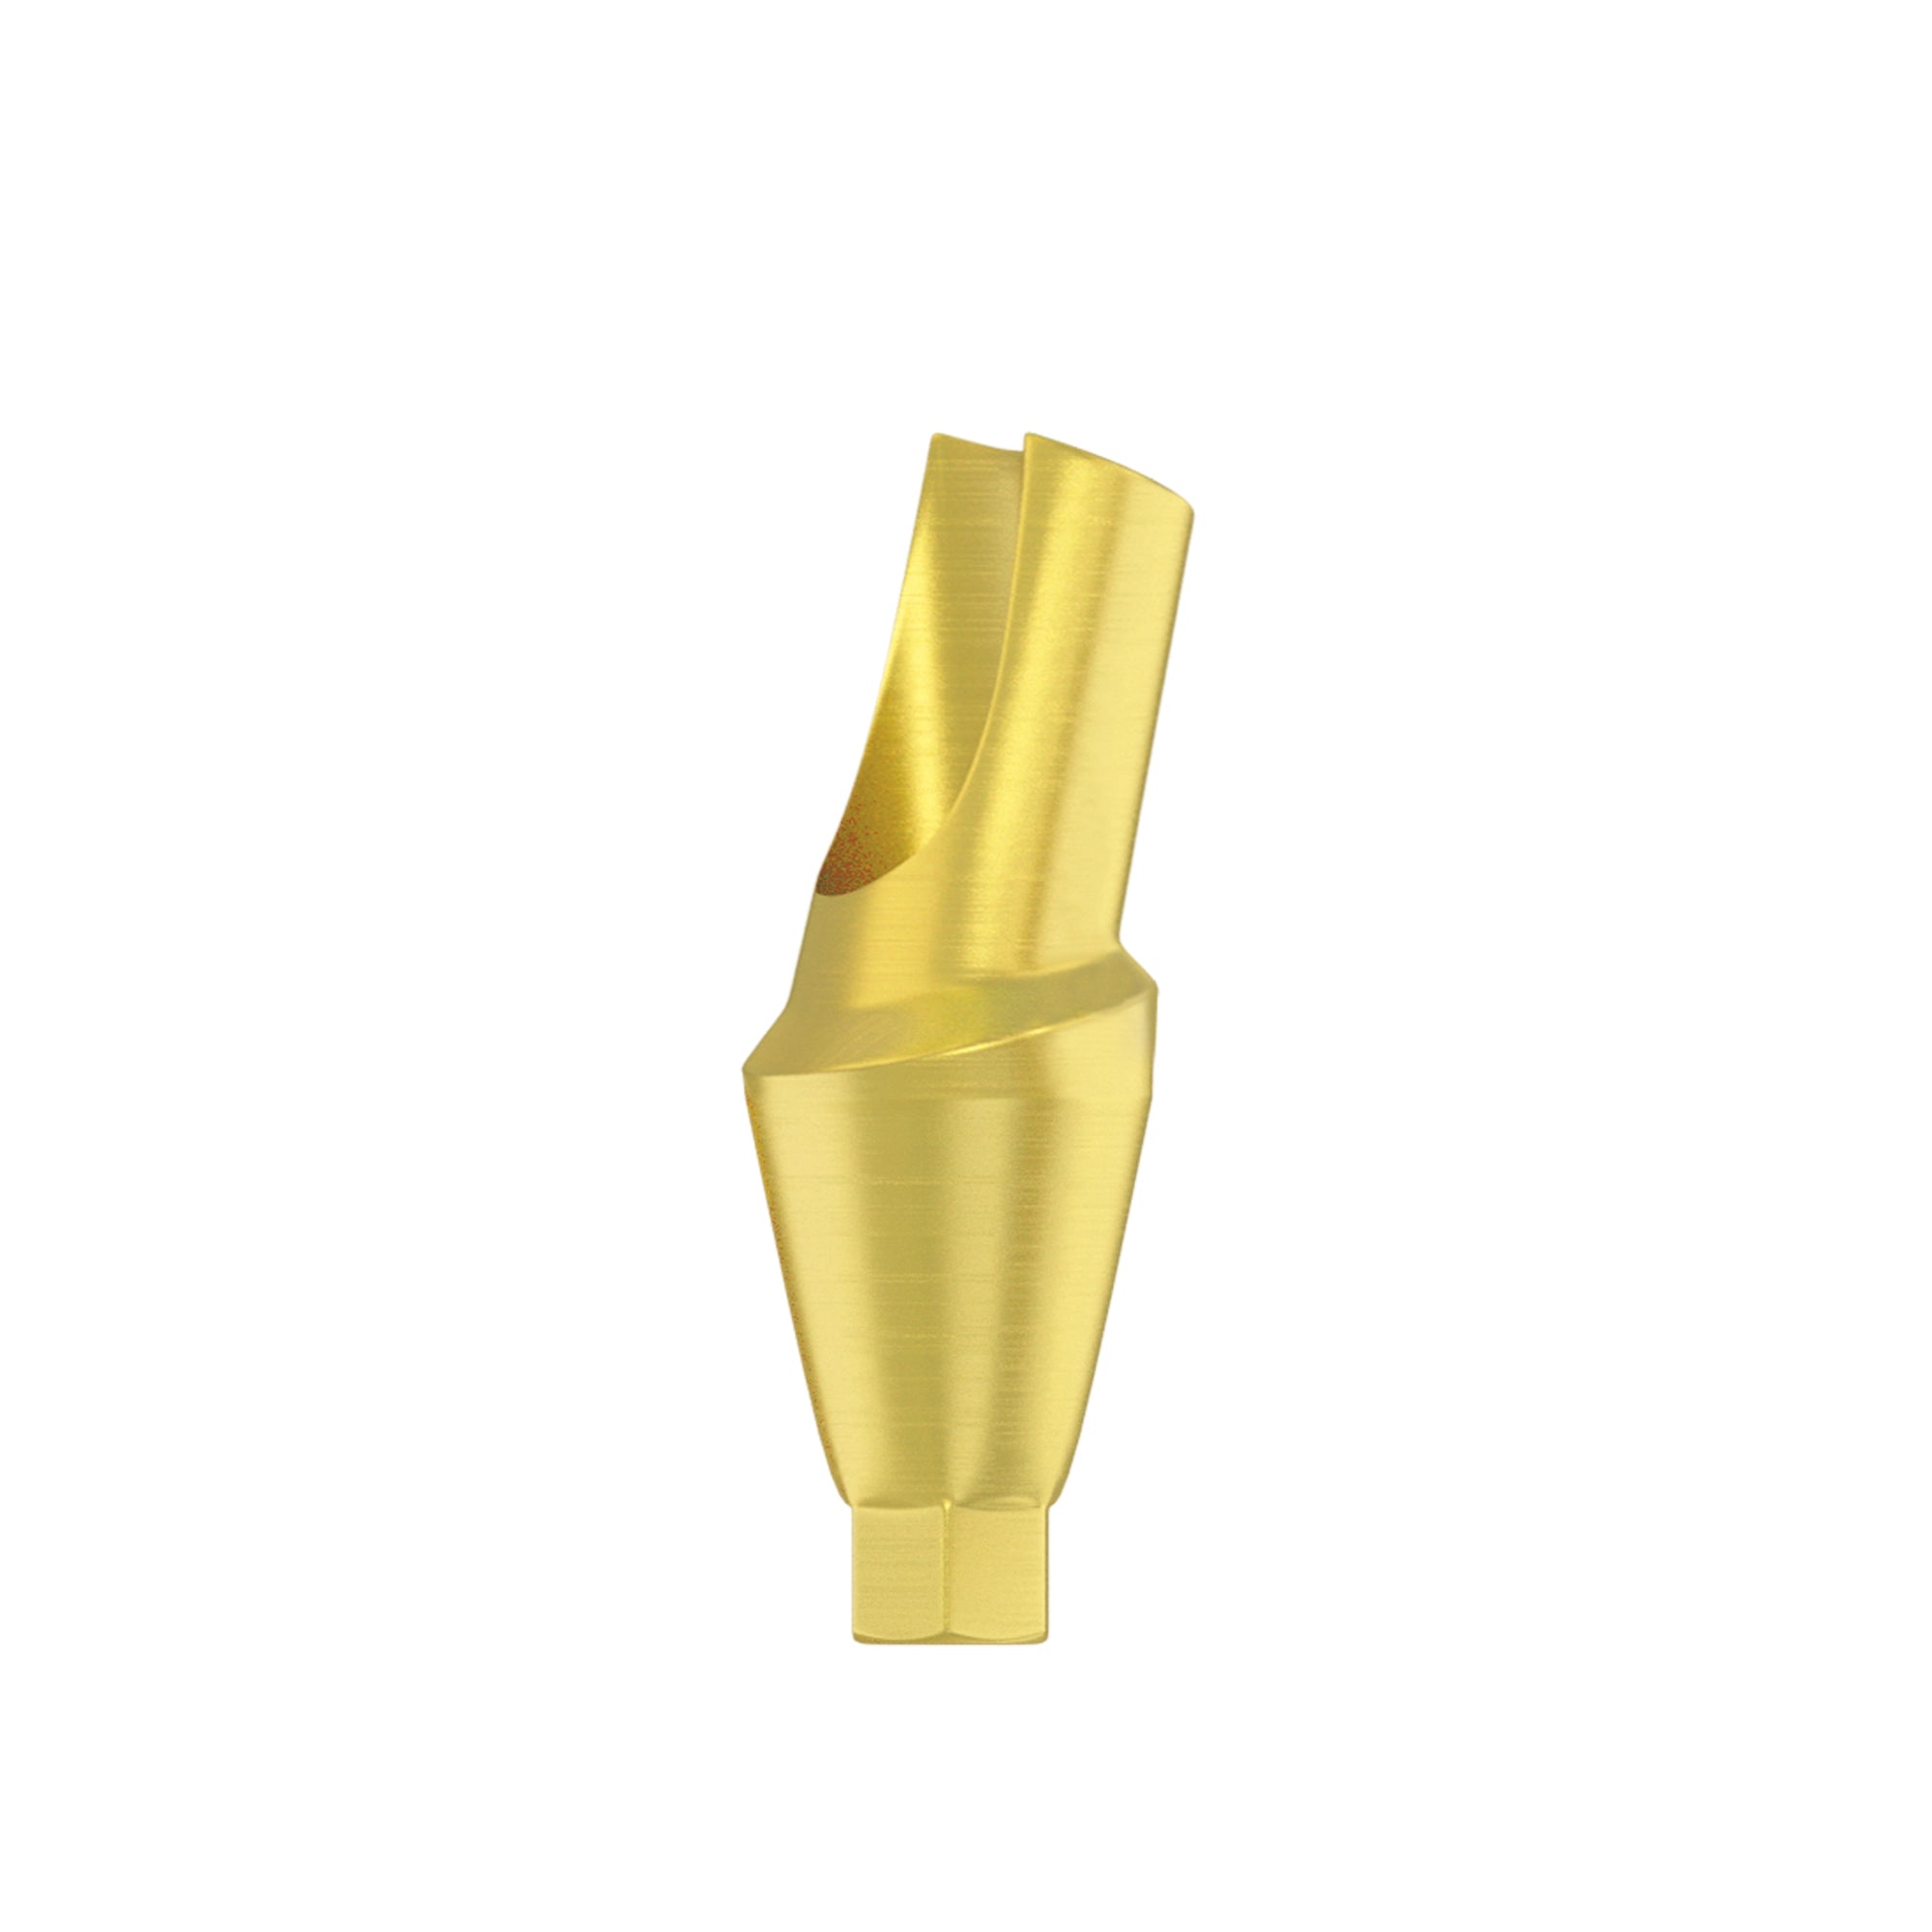 DSI Angulated 15°/25° Anatomic Abutment 3.6mm - Conical Connection NP Ø3.5mm